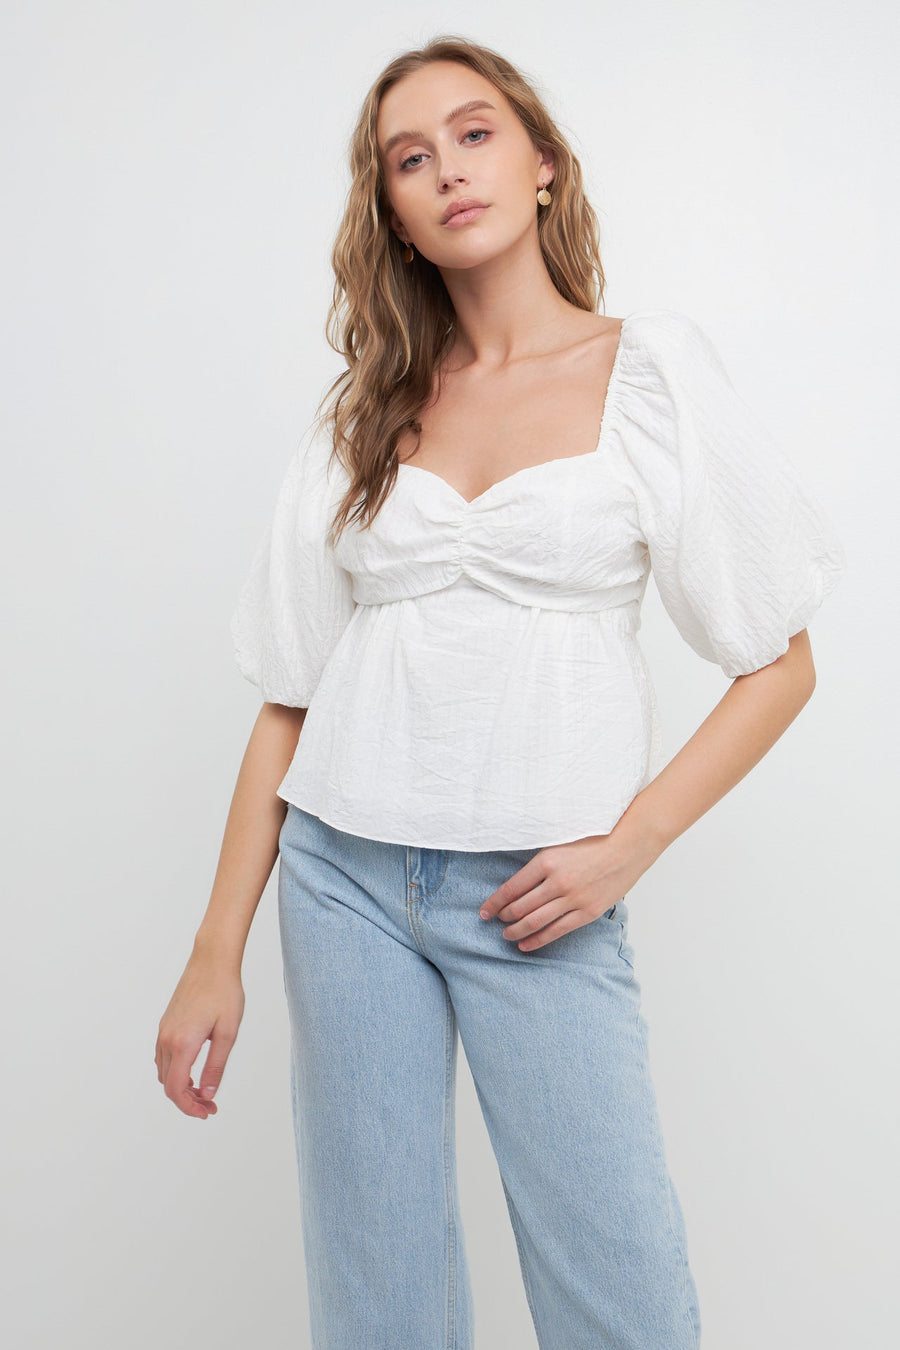 FREE THE ROSES-Textured Back Tied Top-TOPS available at Objectrare